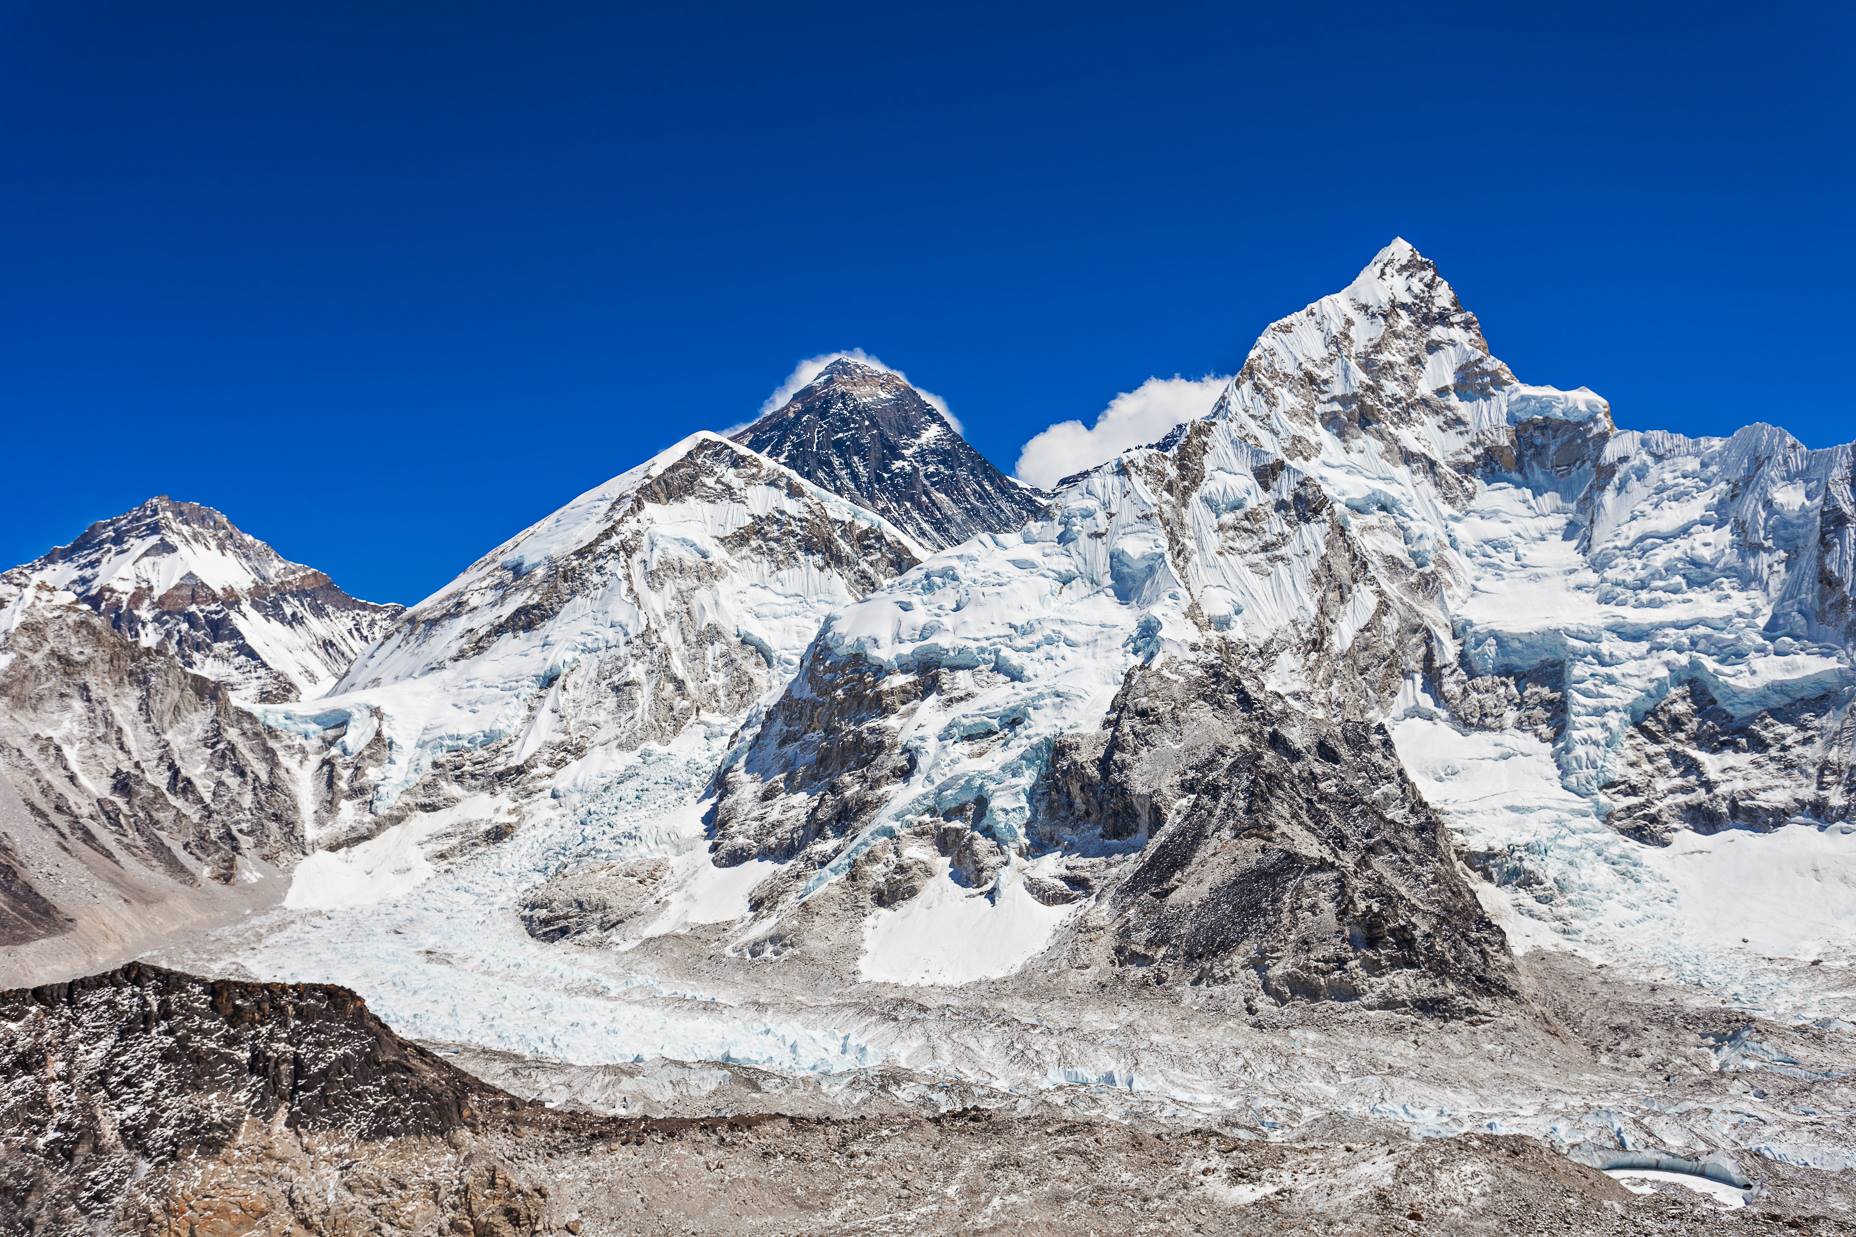 What Himalaya can be seen from Kala Patthar